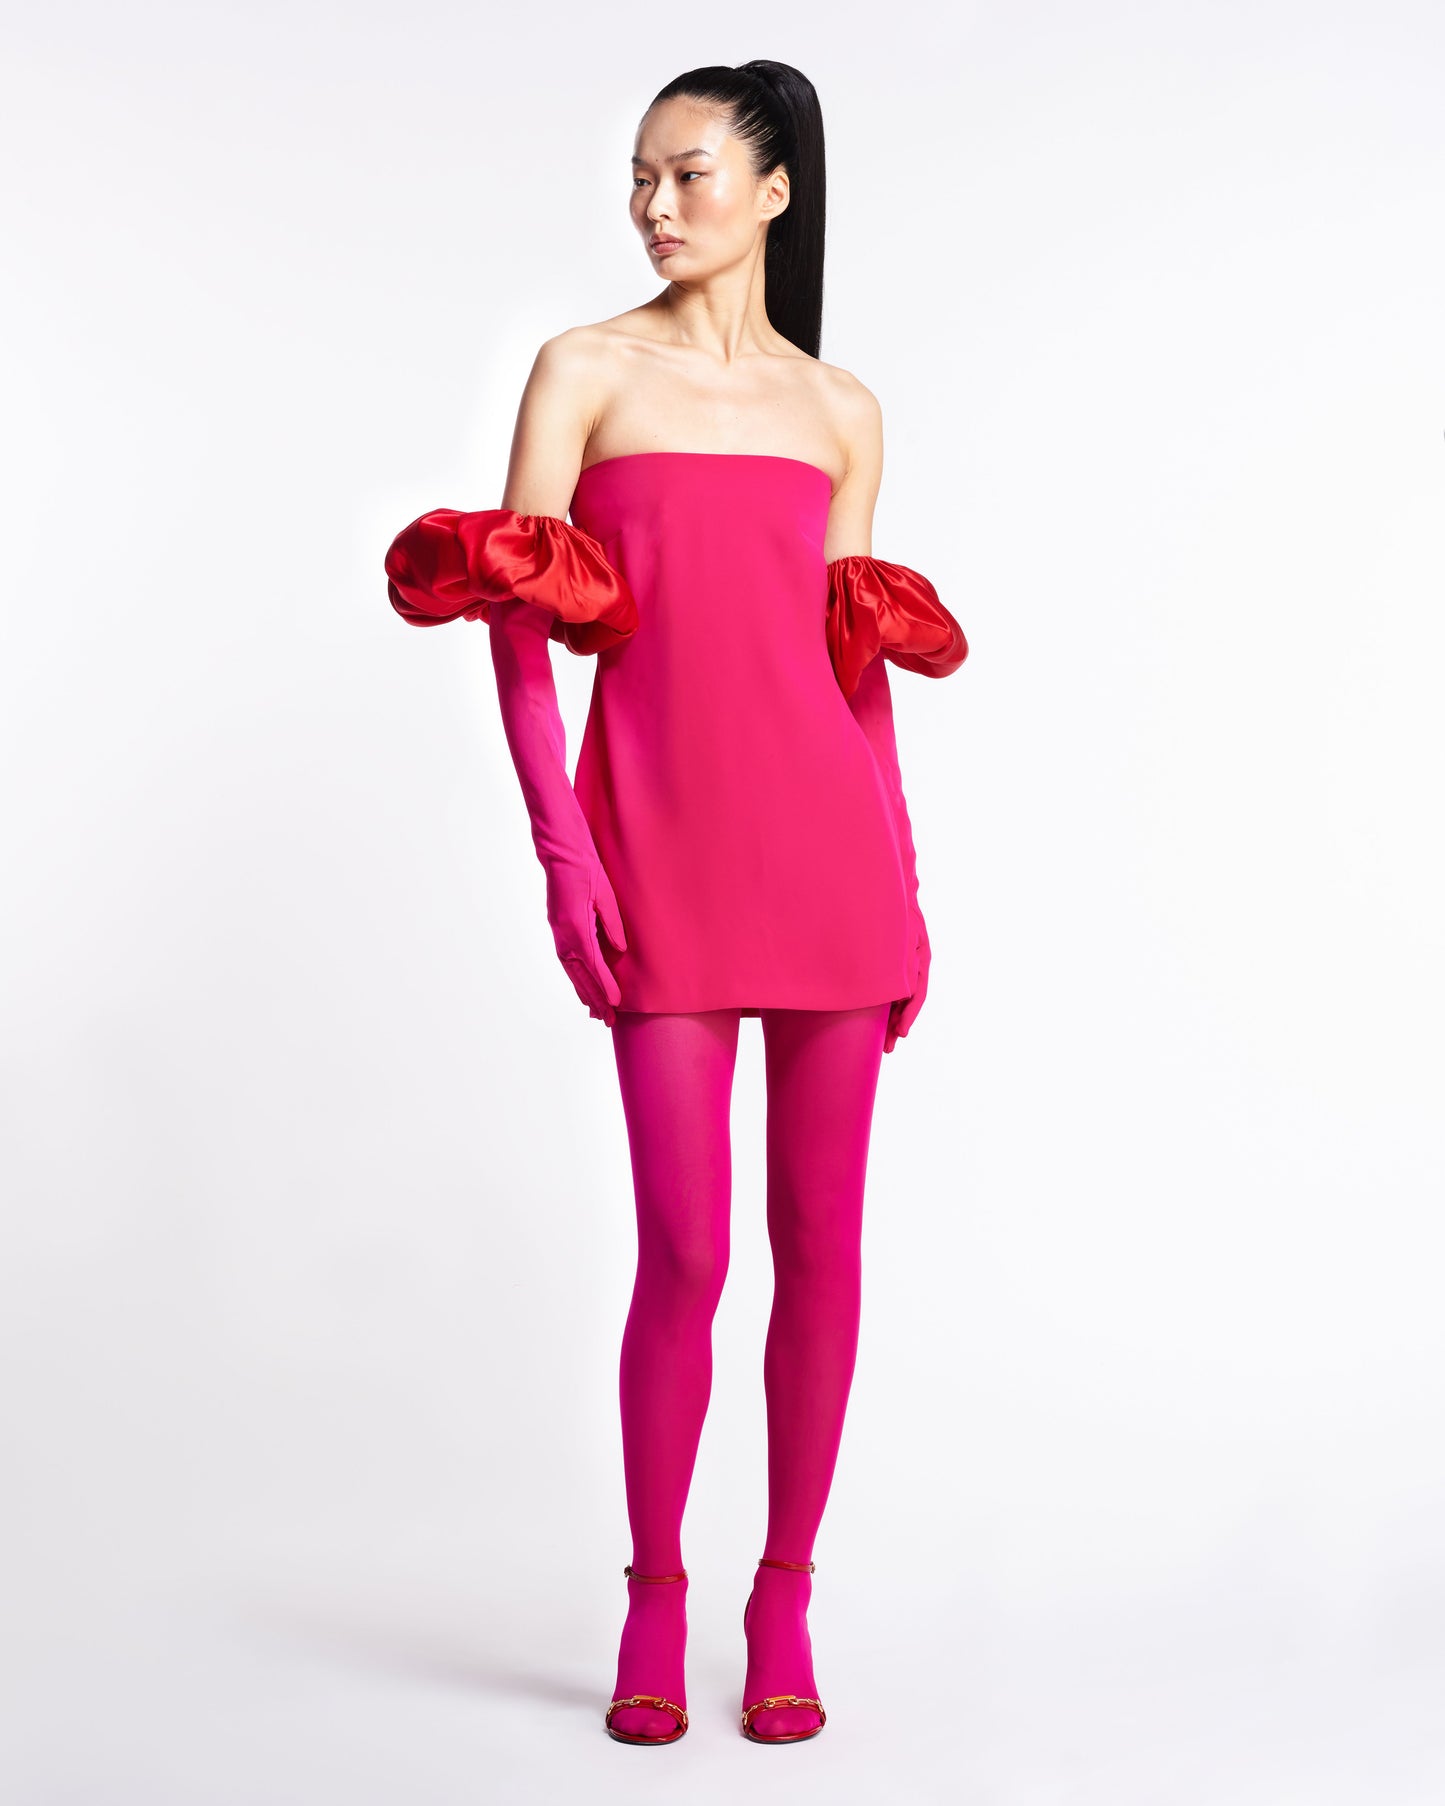 Cupid Dress & Gloves - Hot Pink / Red Puffs